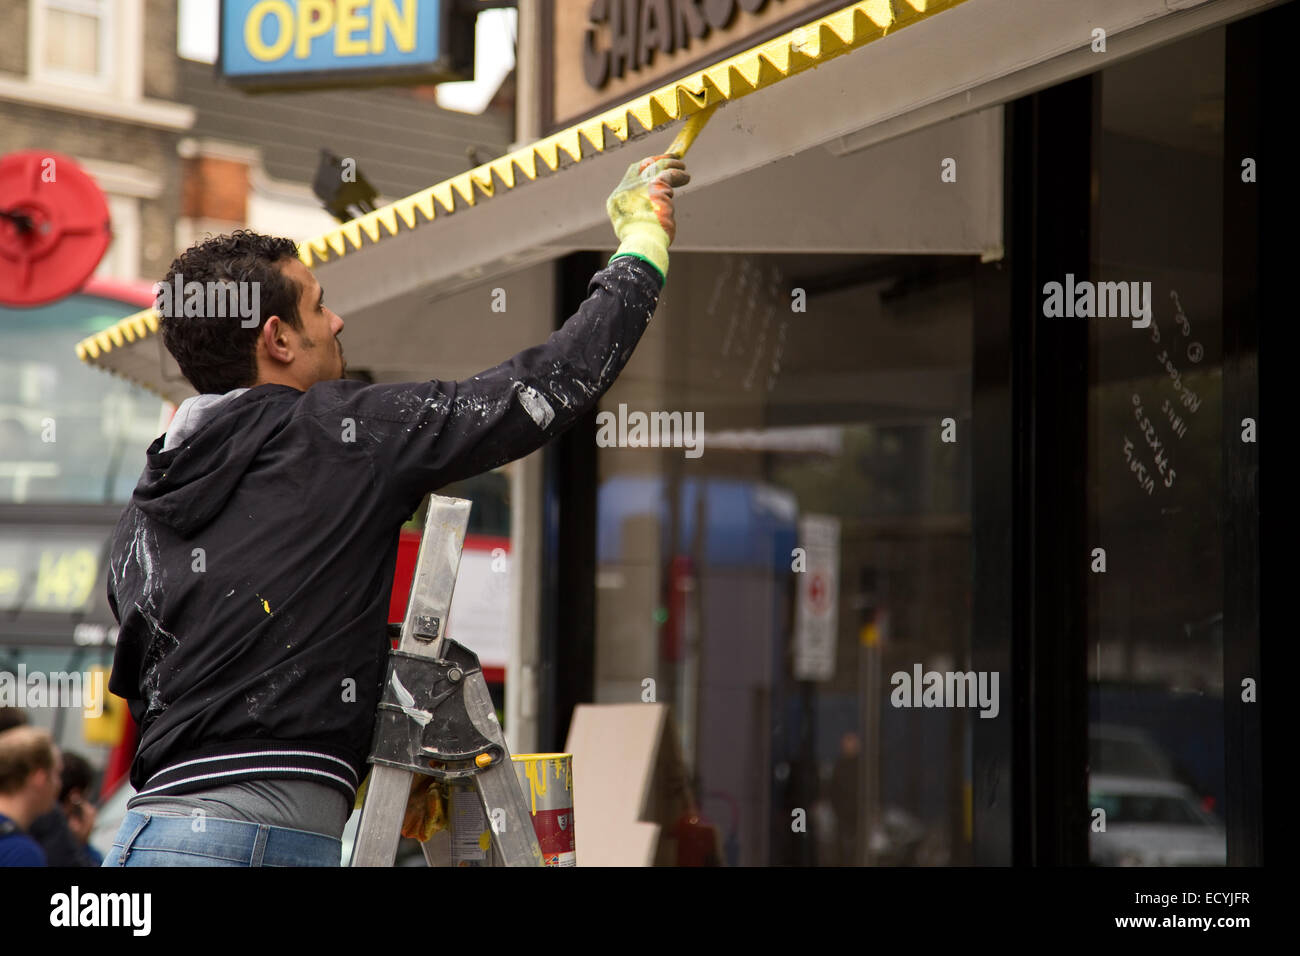 LONDON - NOVEMBER 25TH: Unidentifies handyman painting the exterior of a shop on November the 25th, 2014, in London, England, UK Stock Photo